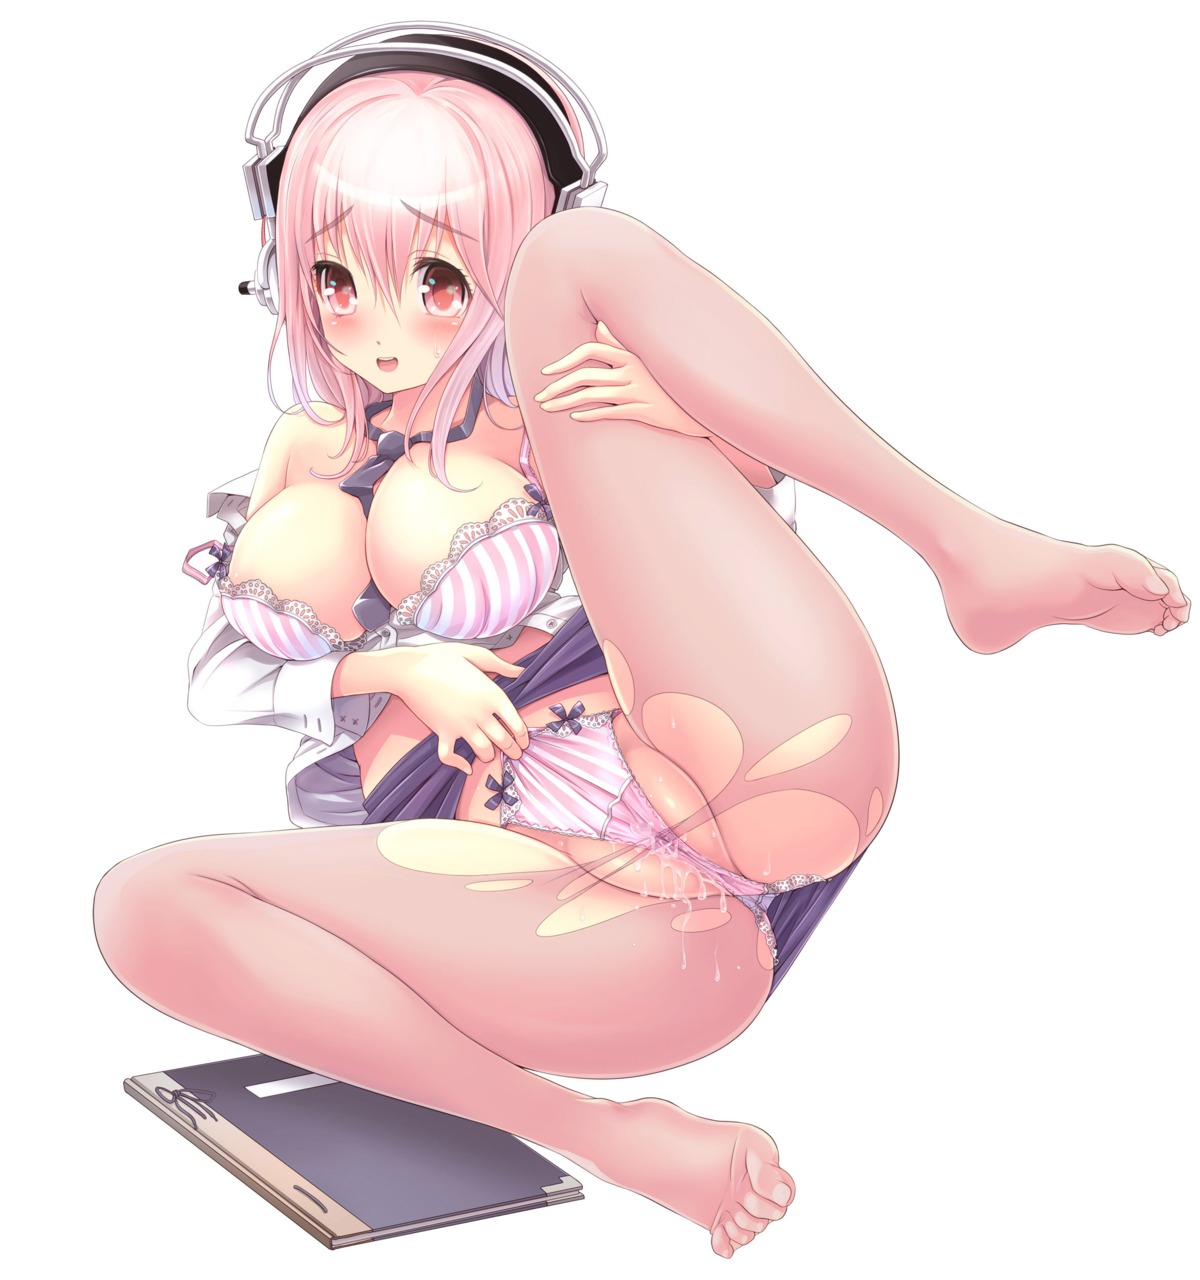 bra breast_hold business_suit censored cleavage feet headphones mag_kan open_shirt pantsu pantyhose pussy pussy_juice shimapan skirt_lift sonico super_sonico thong torn_clothes v-mag